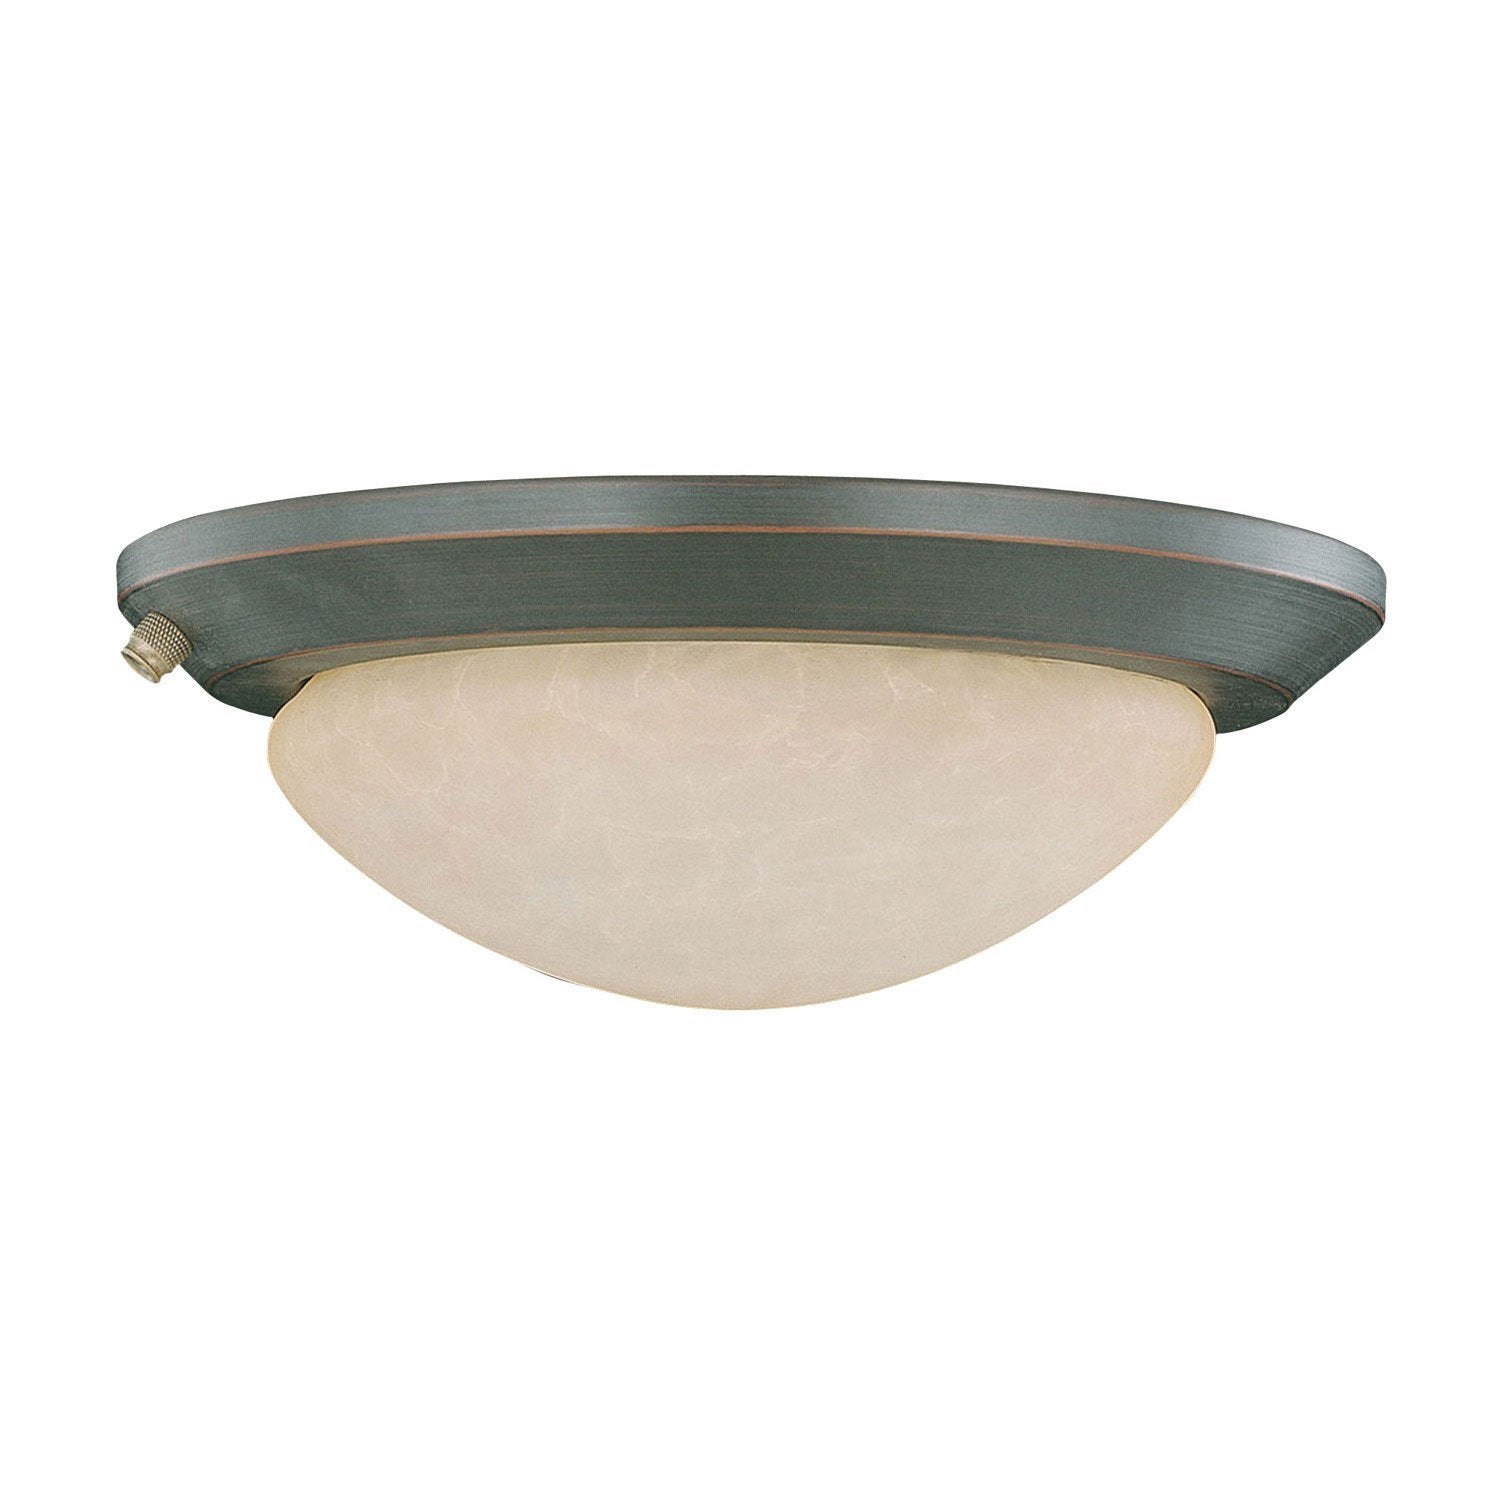 Concord Fans 2 Light Oil Rubbed Bronze Finish Low Profile Ceiling